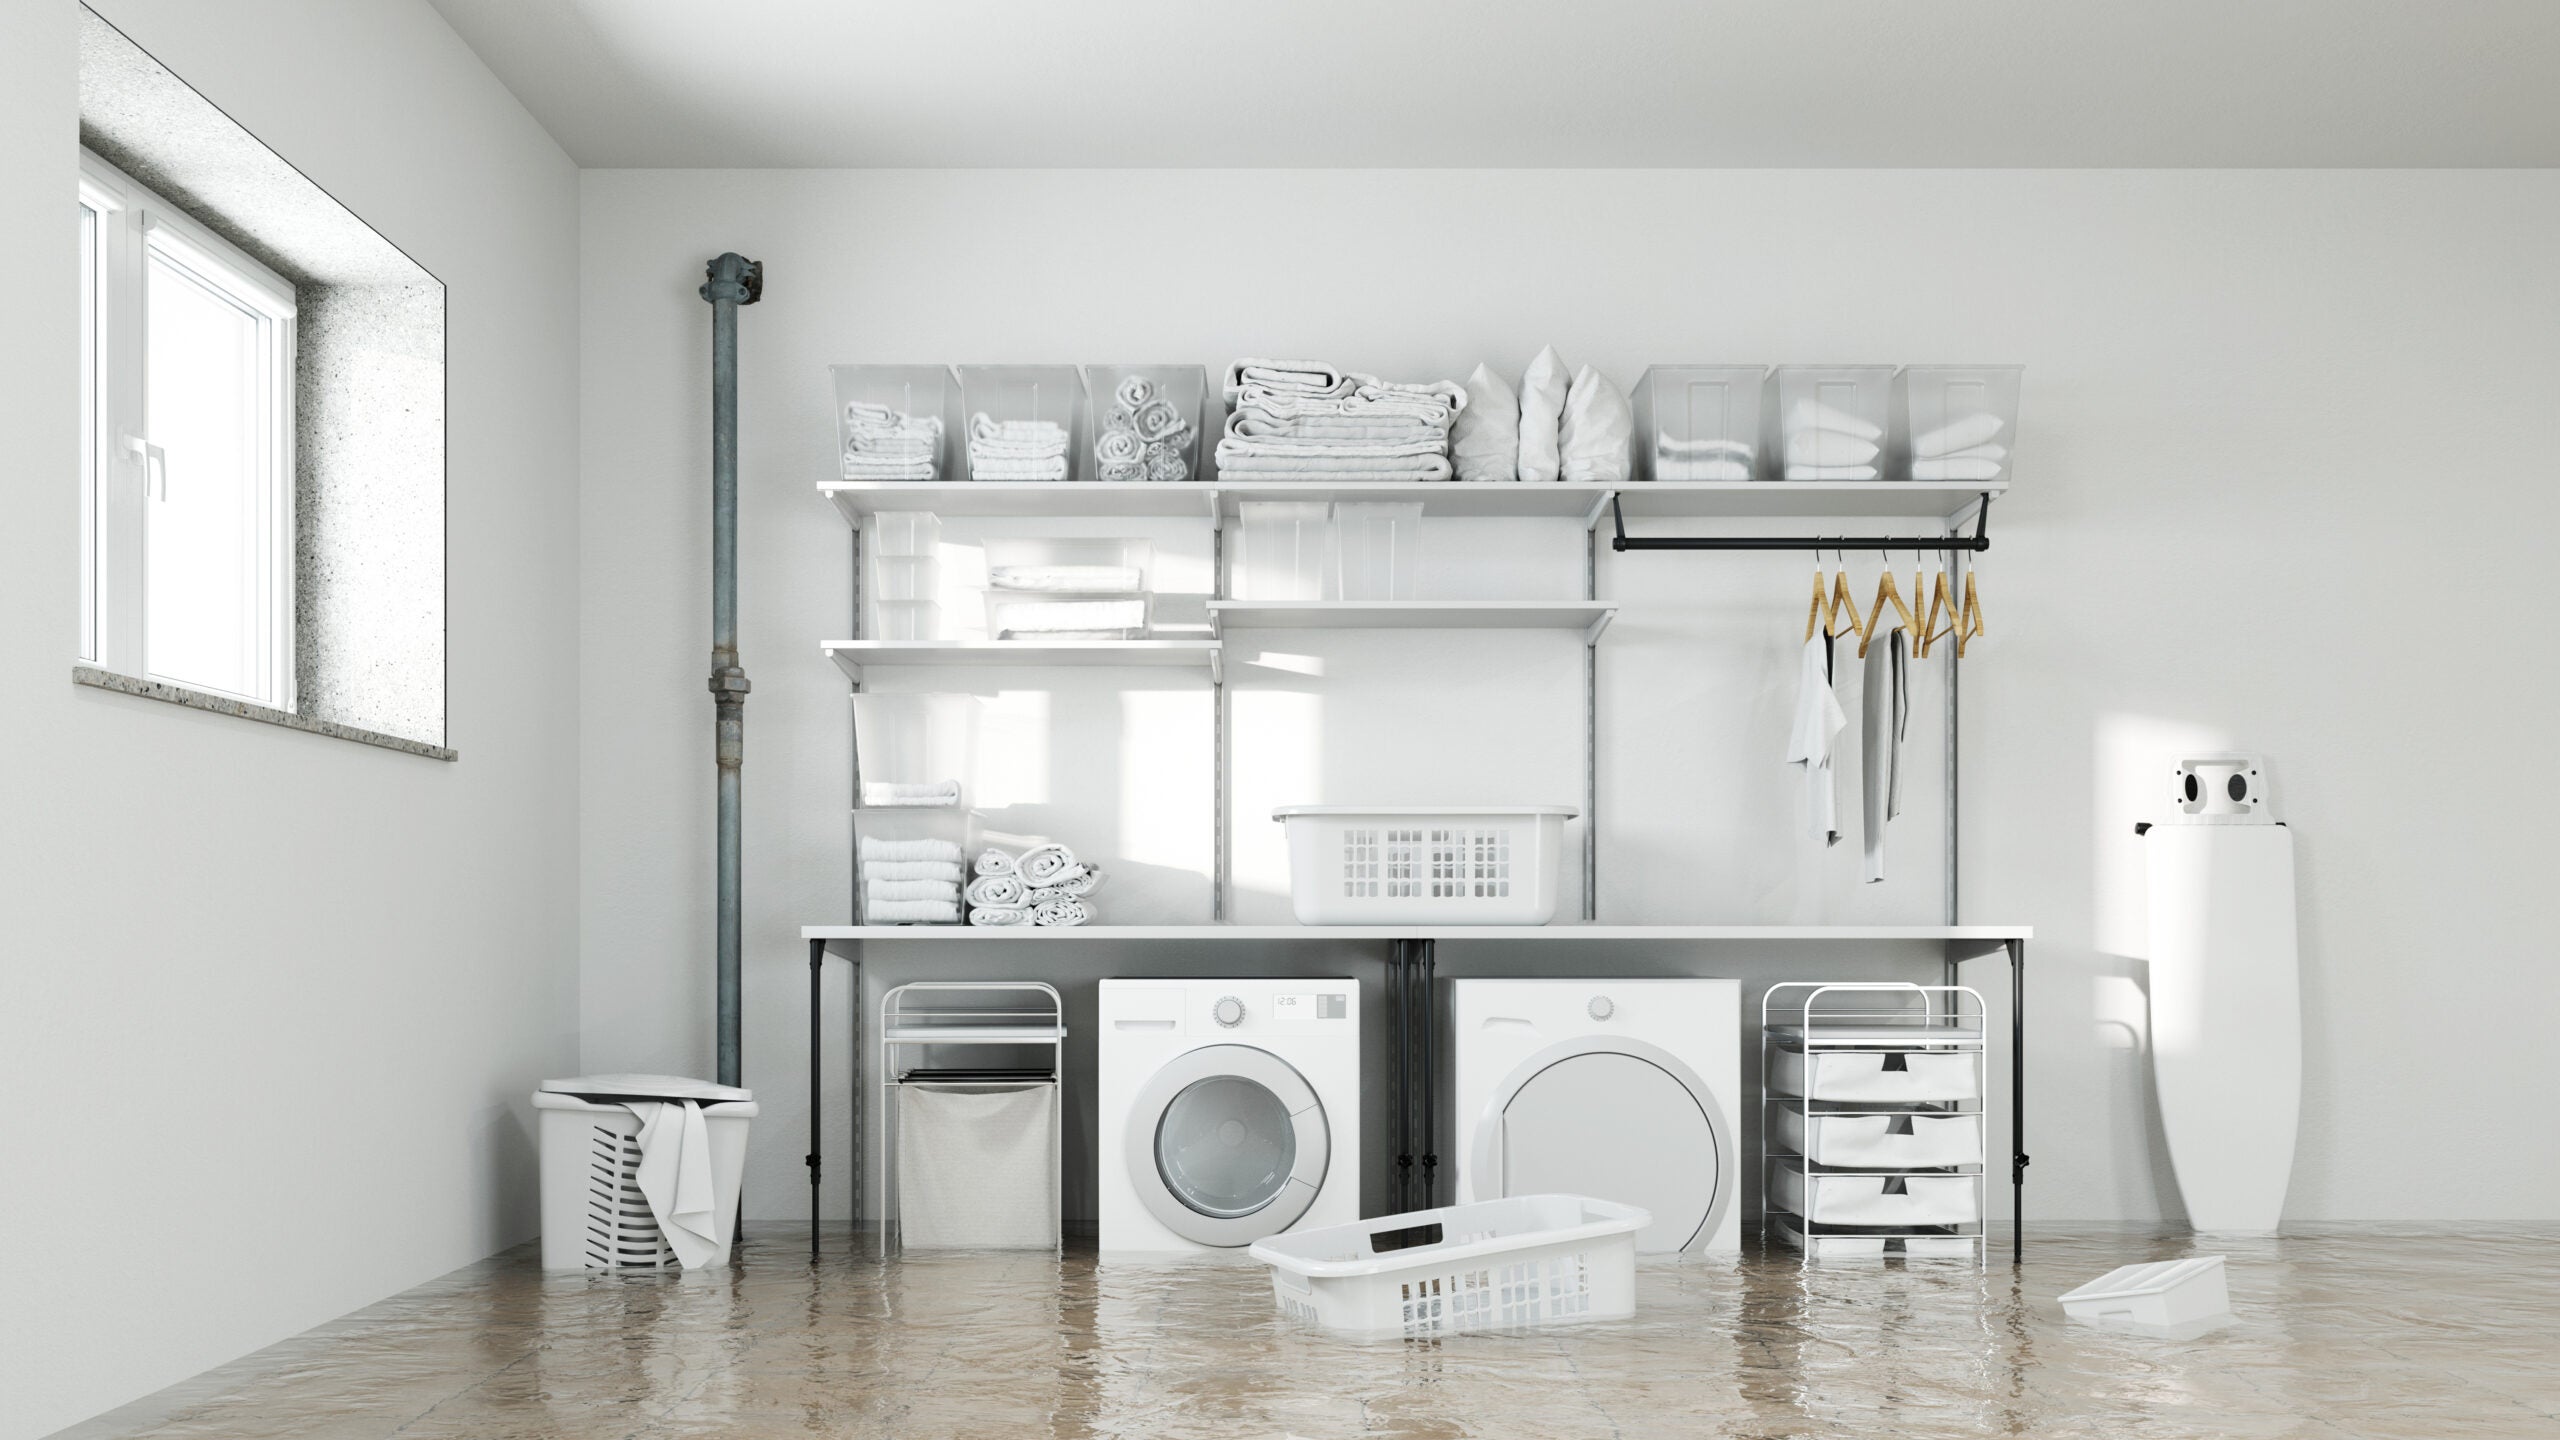 A flooded basement laundry area with white appliances and gray walls.